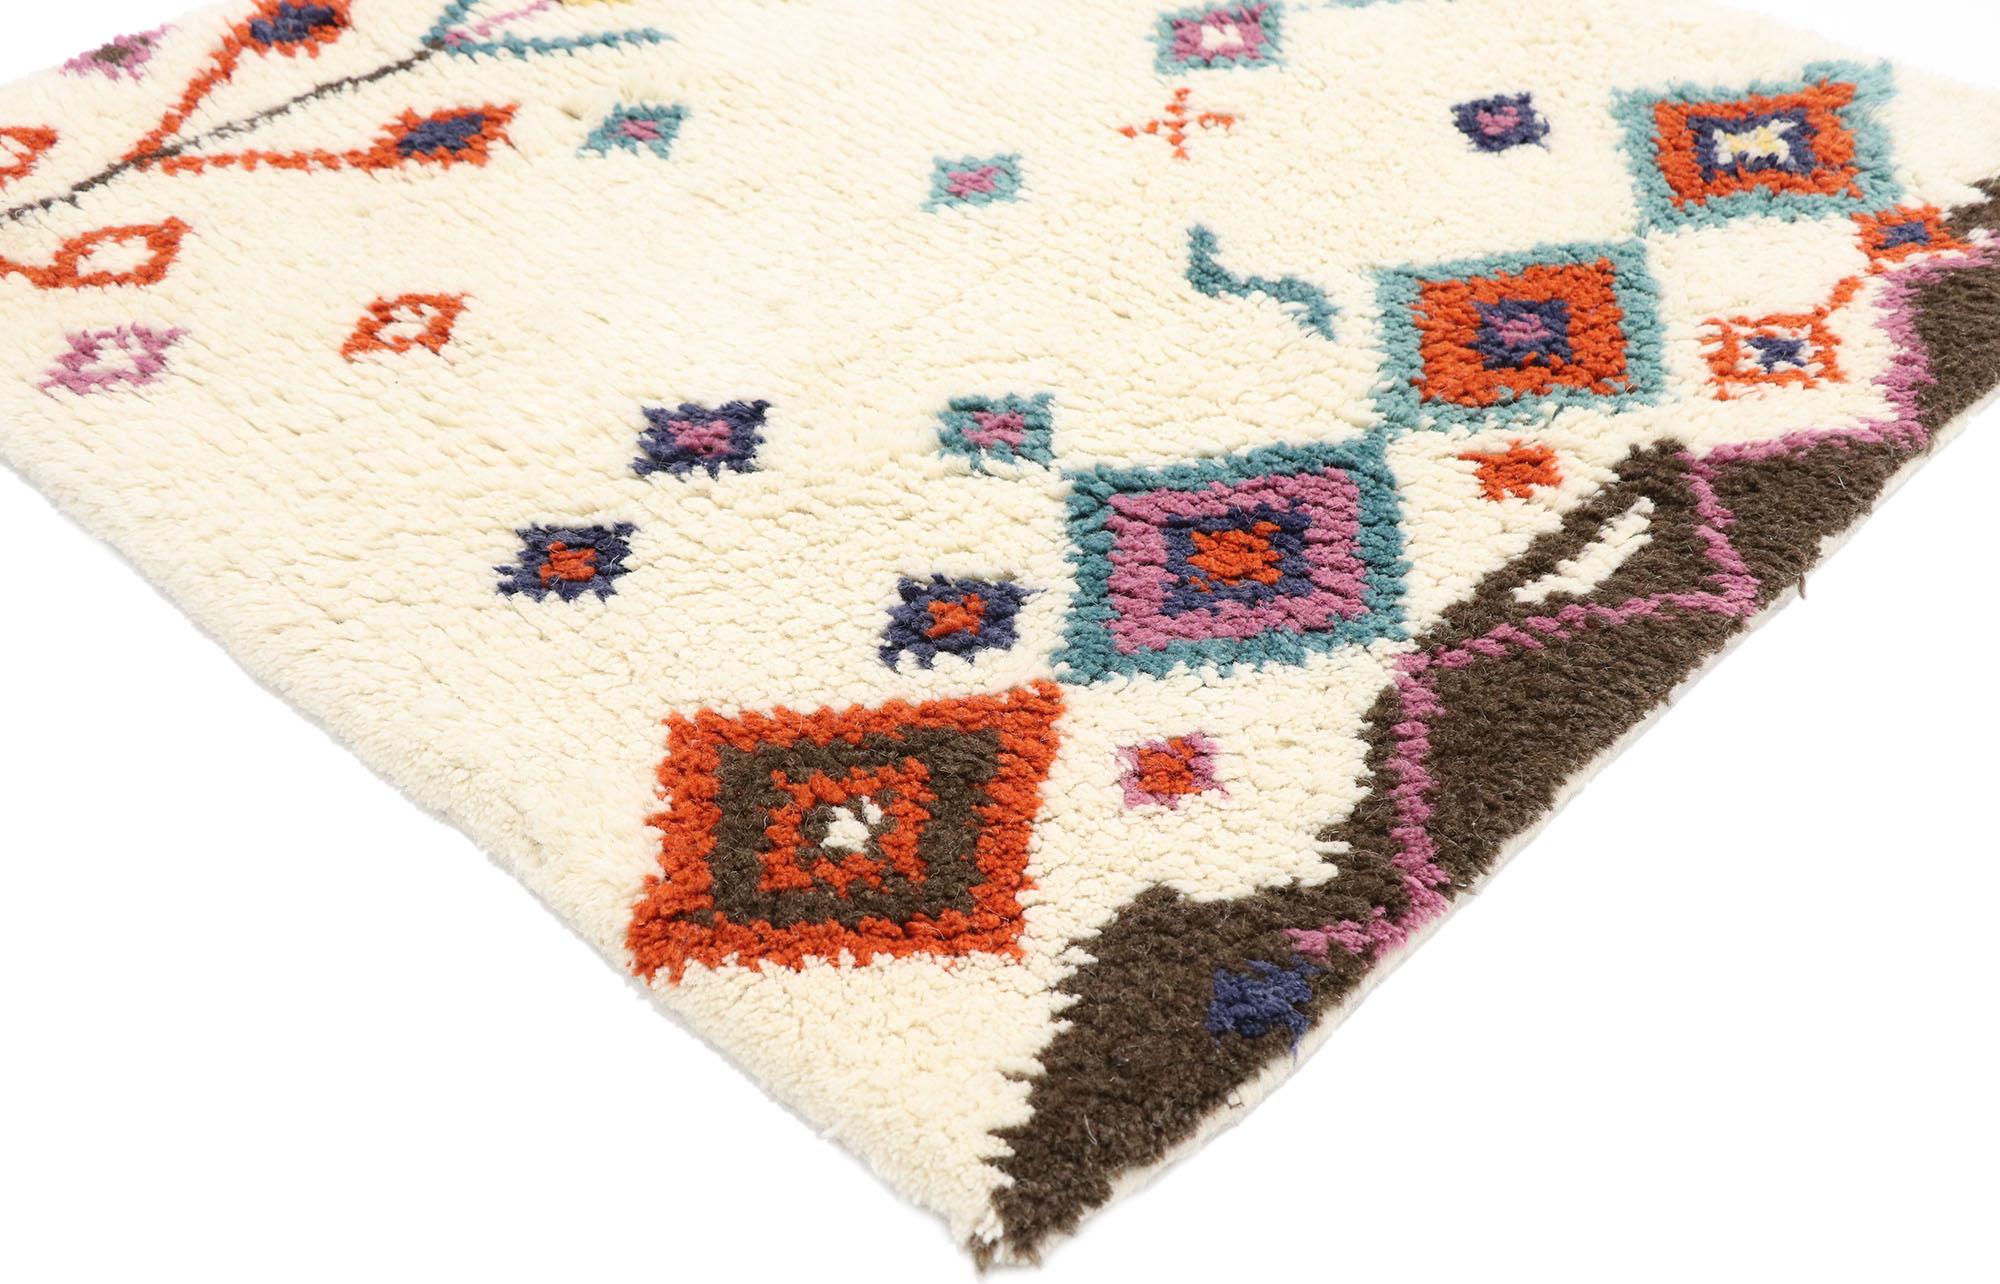 30646, new contemporary Moroccan style rug with boho chic hygge vibes. Full of tiny details and a bold expressive design combined with vibrant colors and tribal vibes, this hand-knotted wool Moroccan style rug is a captivating vision of woven